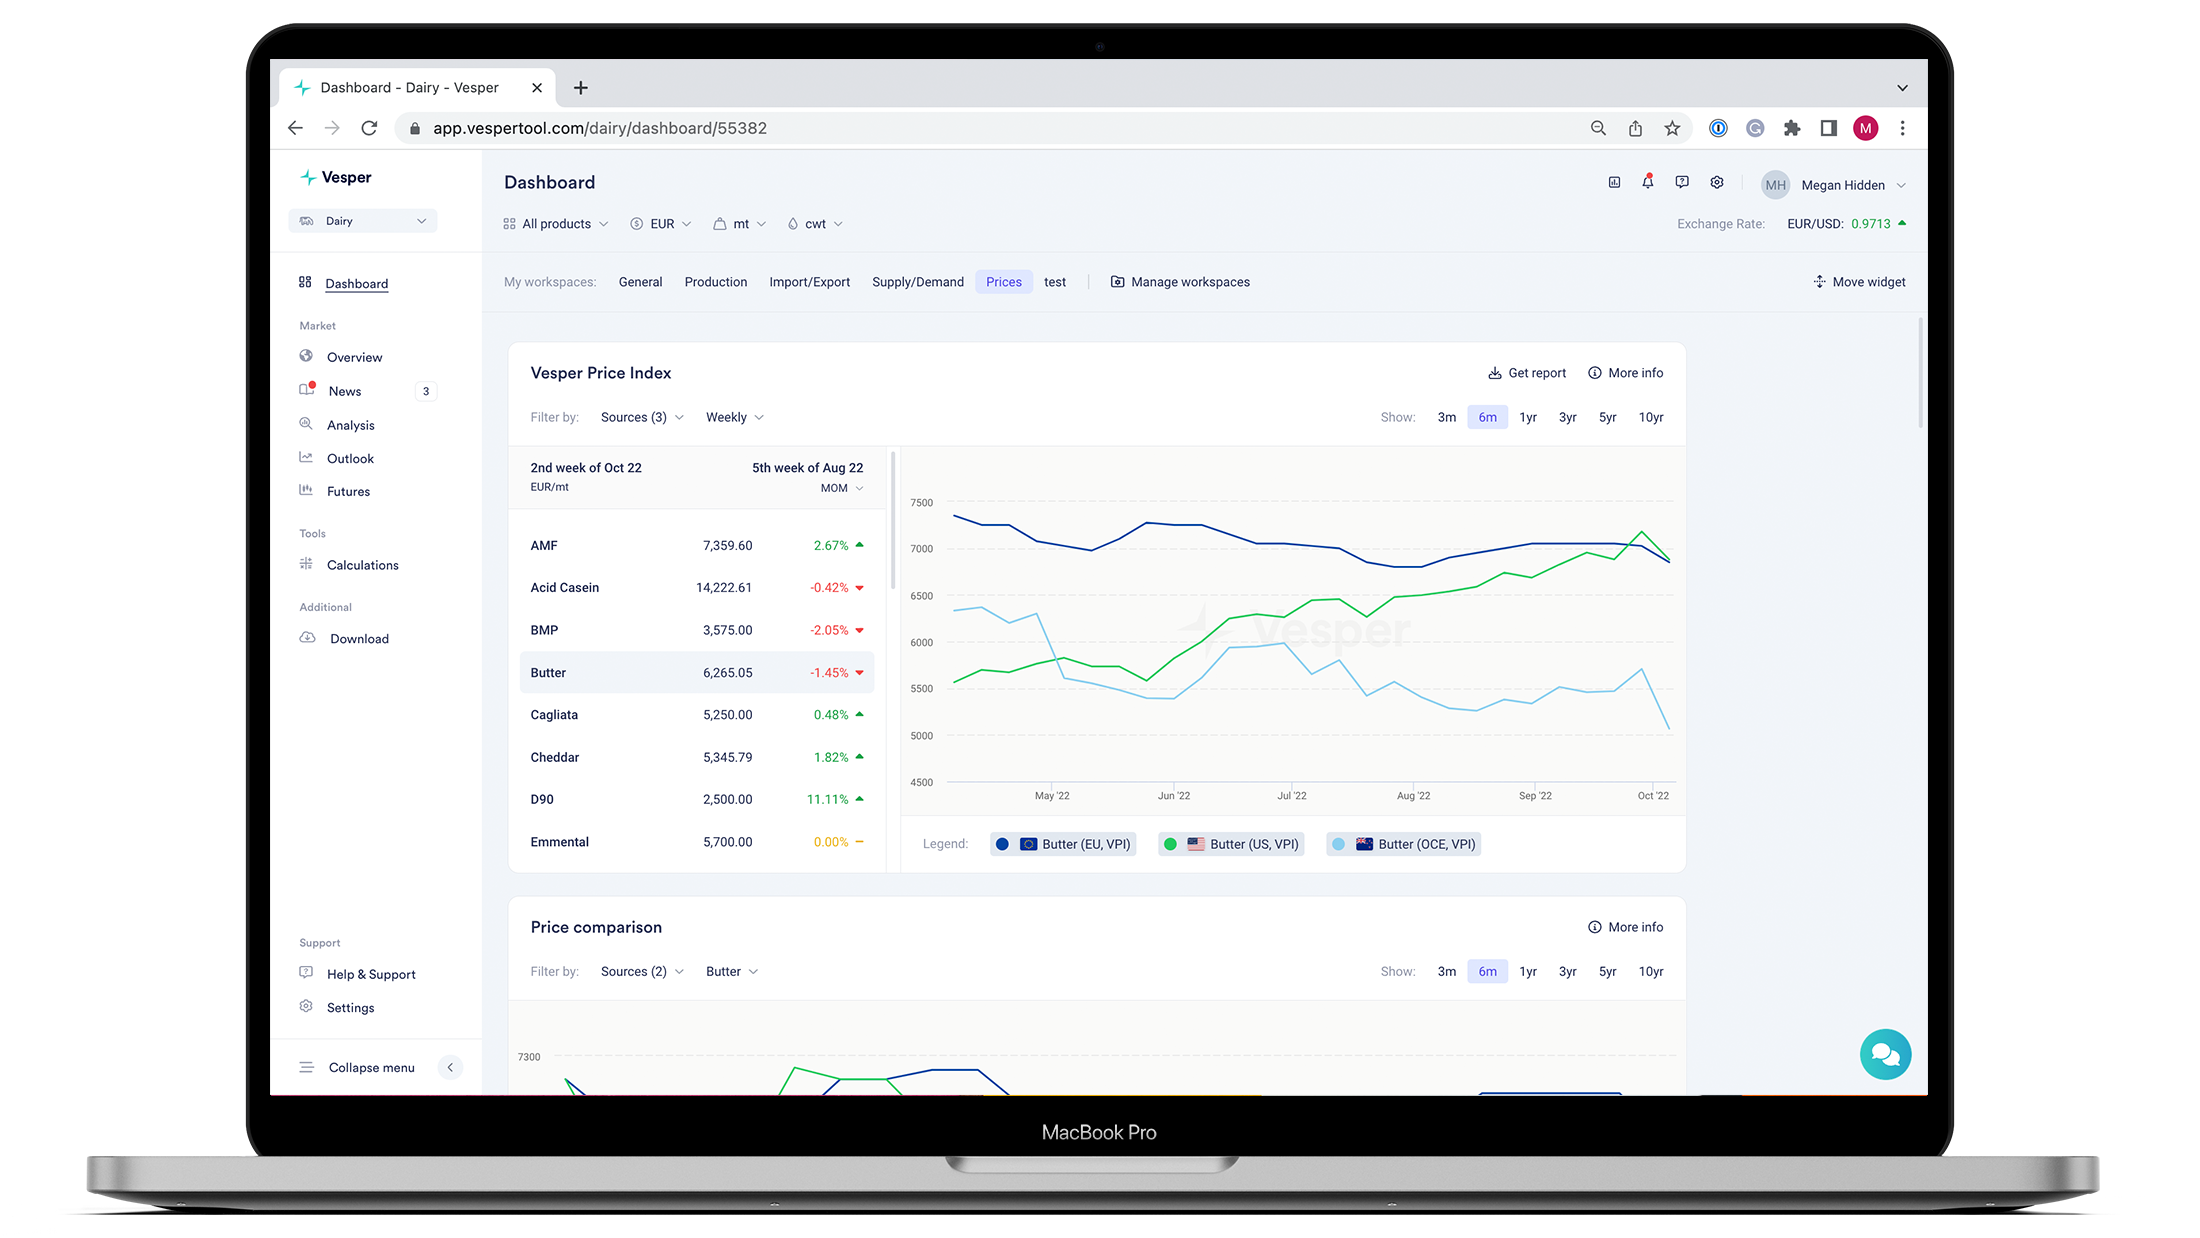 Intuitive and customizable dashboards including an independent pricing index - The Vesper Price Index. This is a screenshot of the commodity: Dairy.